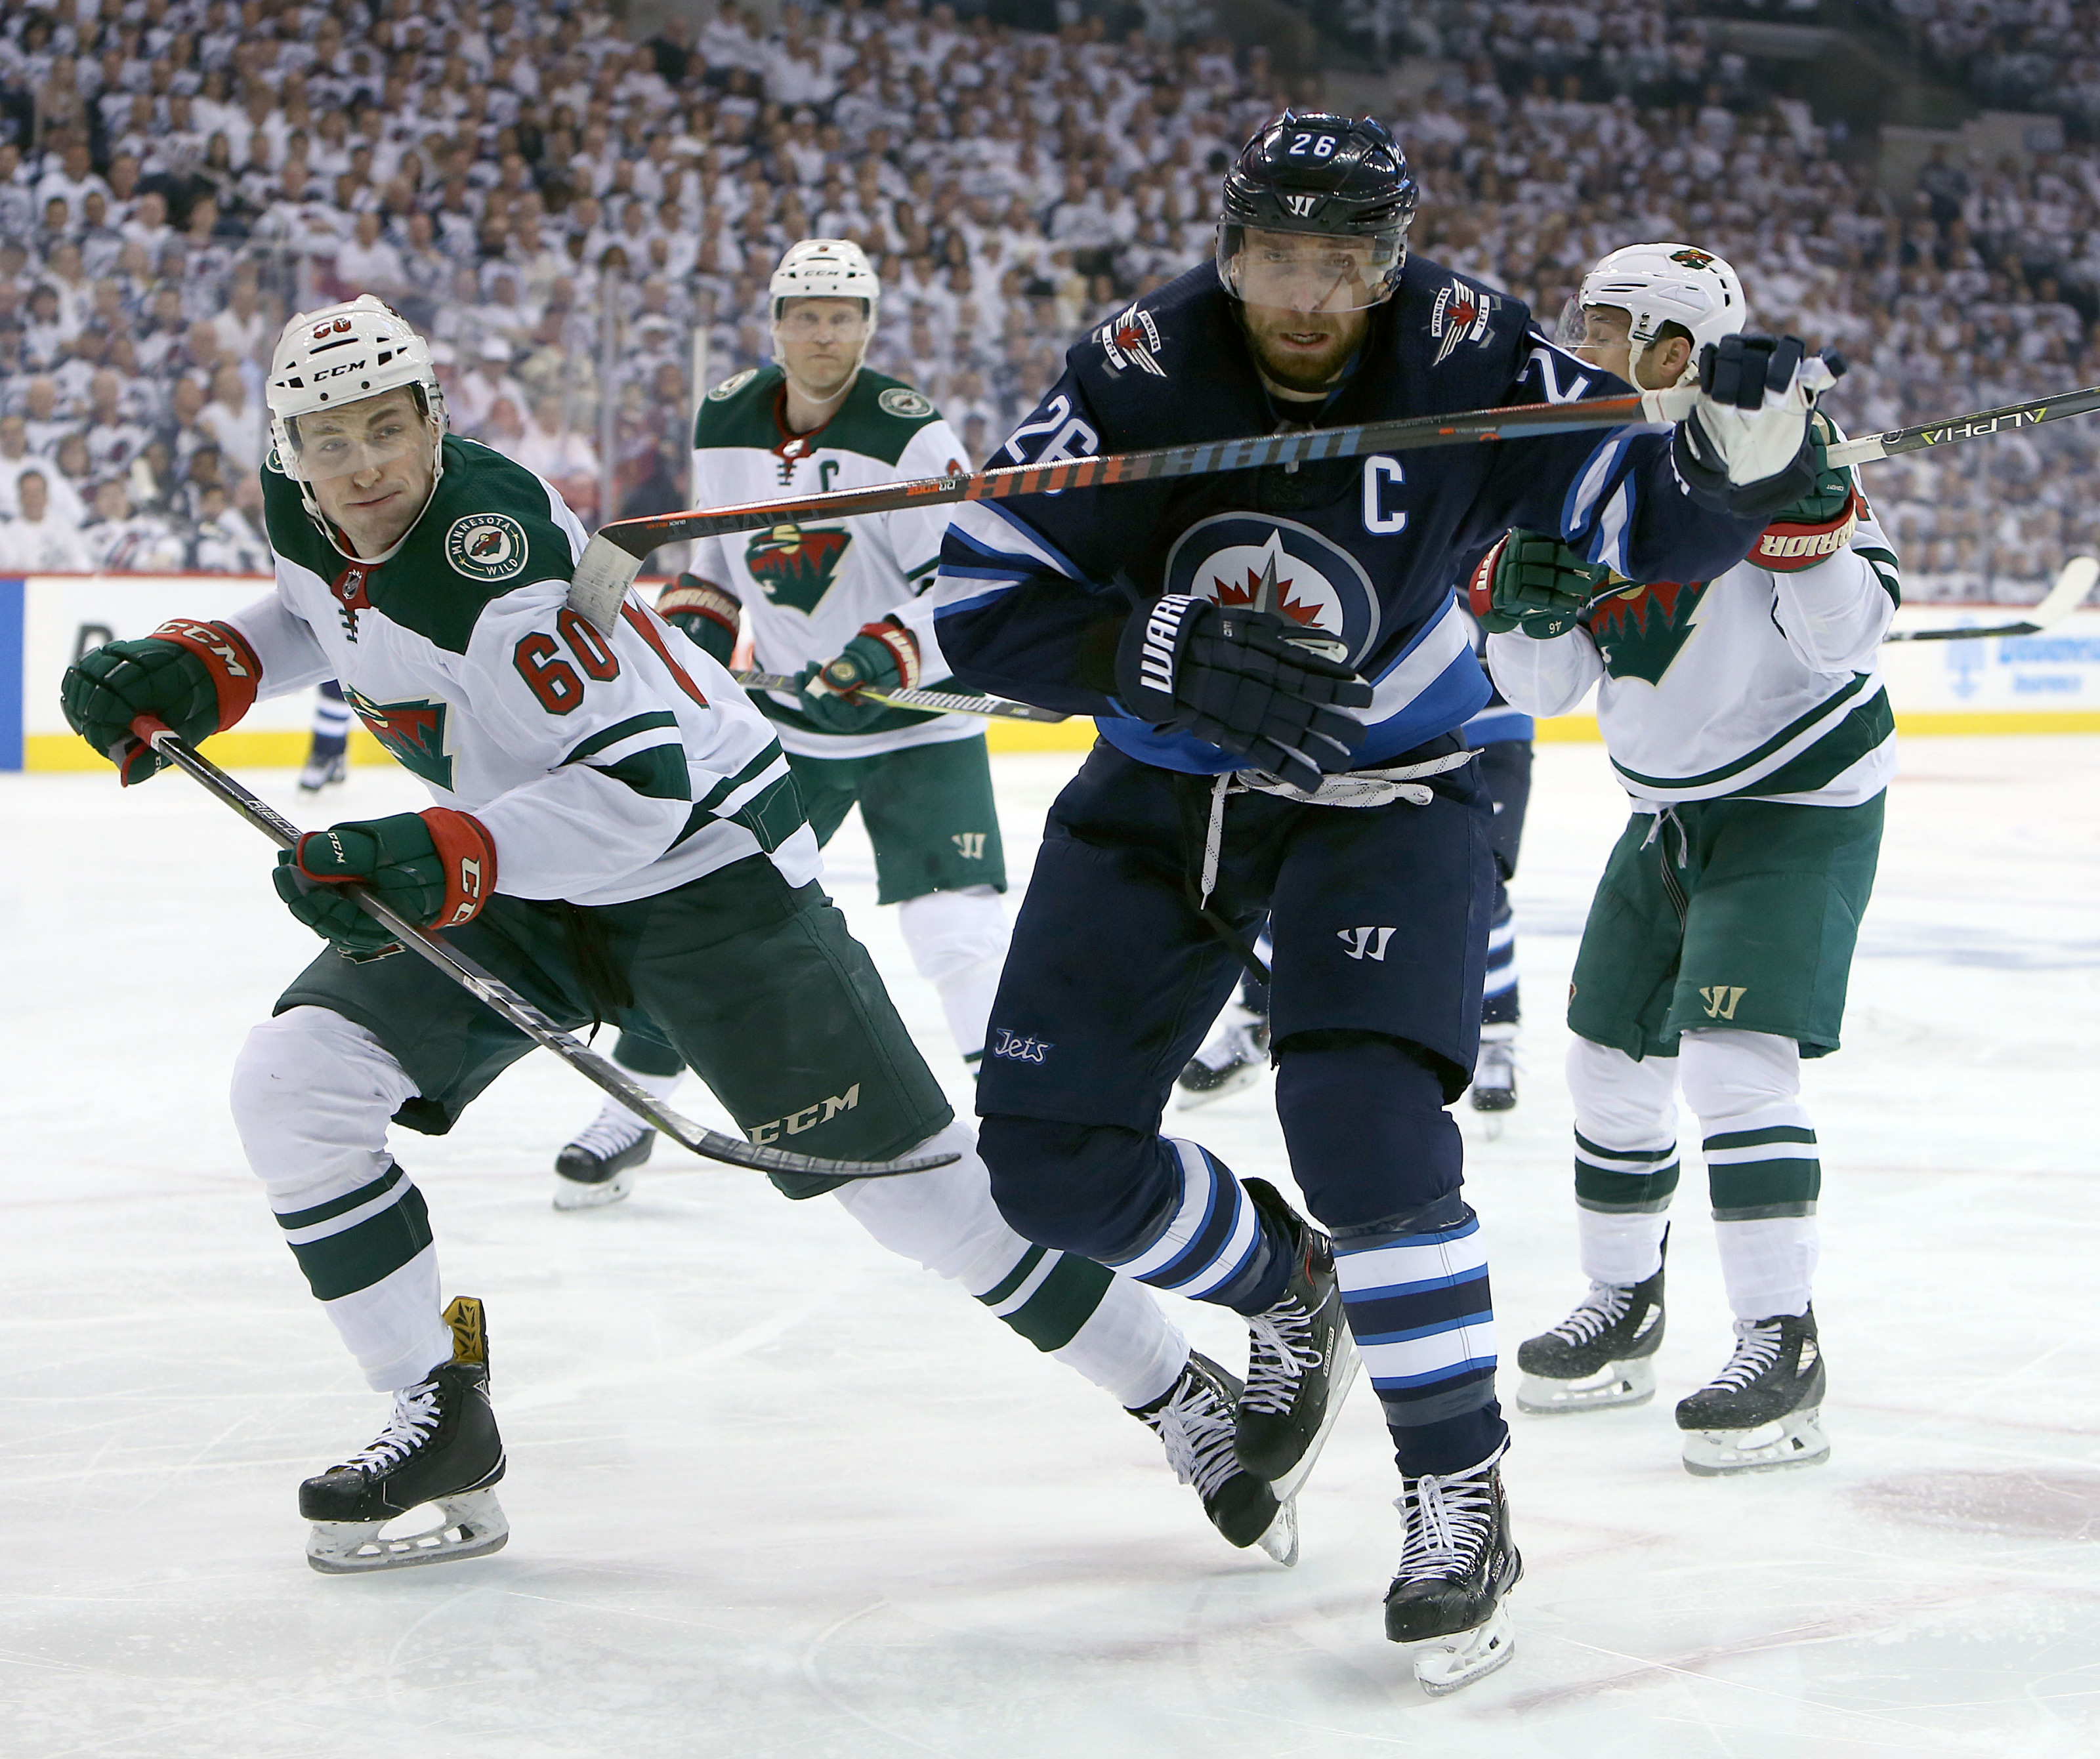 Jets vs. Wild Game 1: Full highlights, final score and more